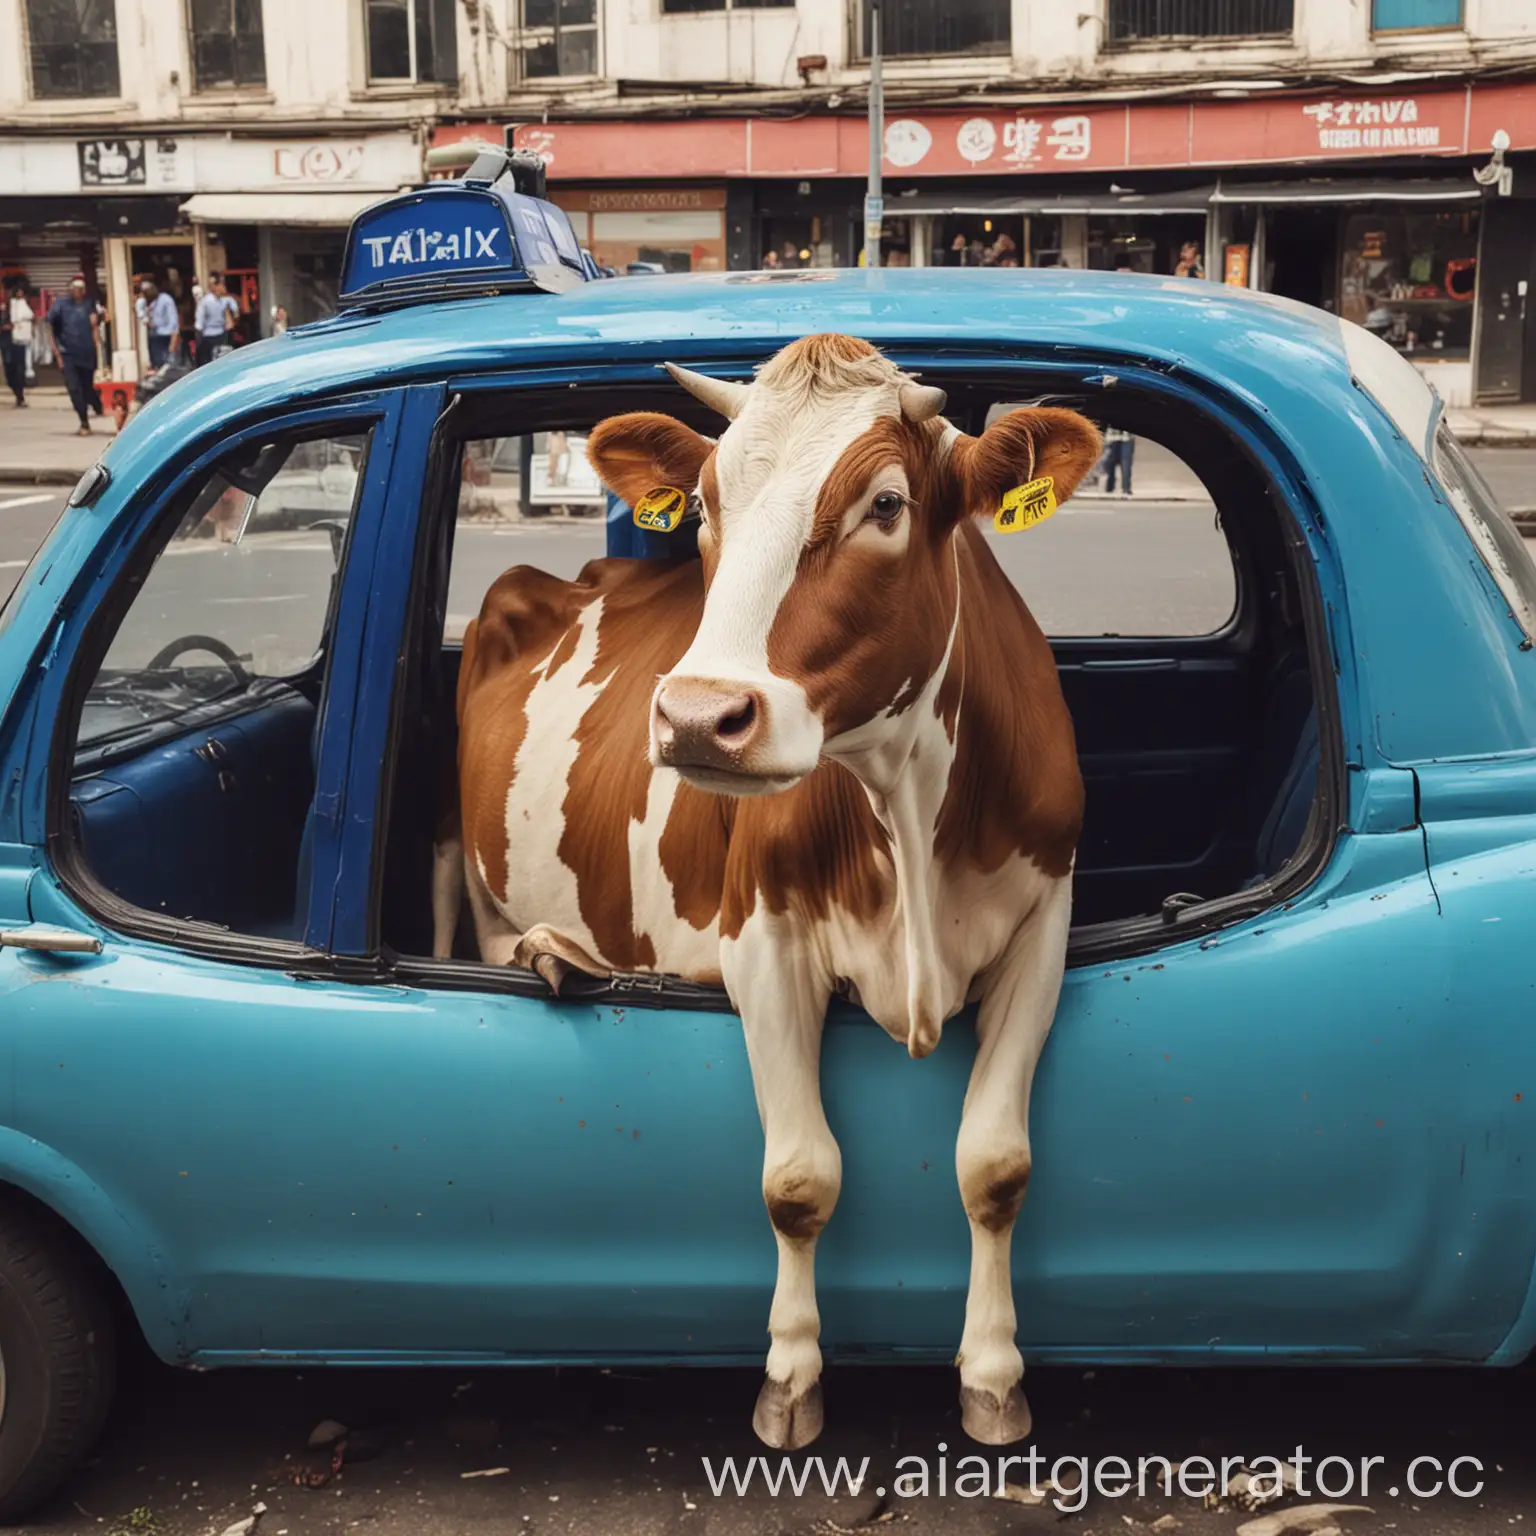 Cow-Sitting-in-Blue-Taxi-Quirky-Transportation-Scene-with-Bovine-Passenger